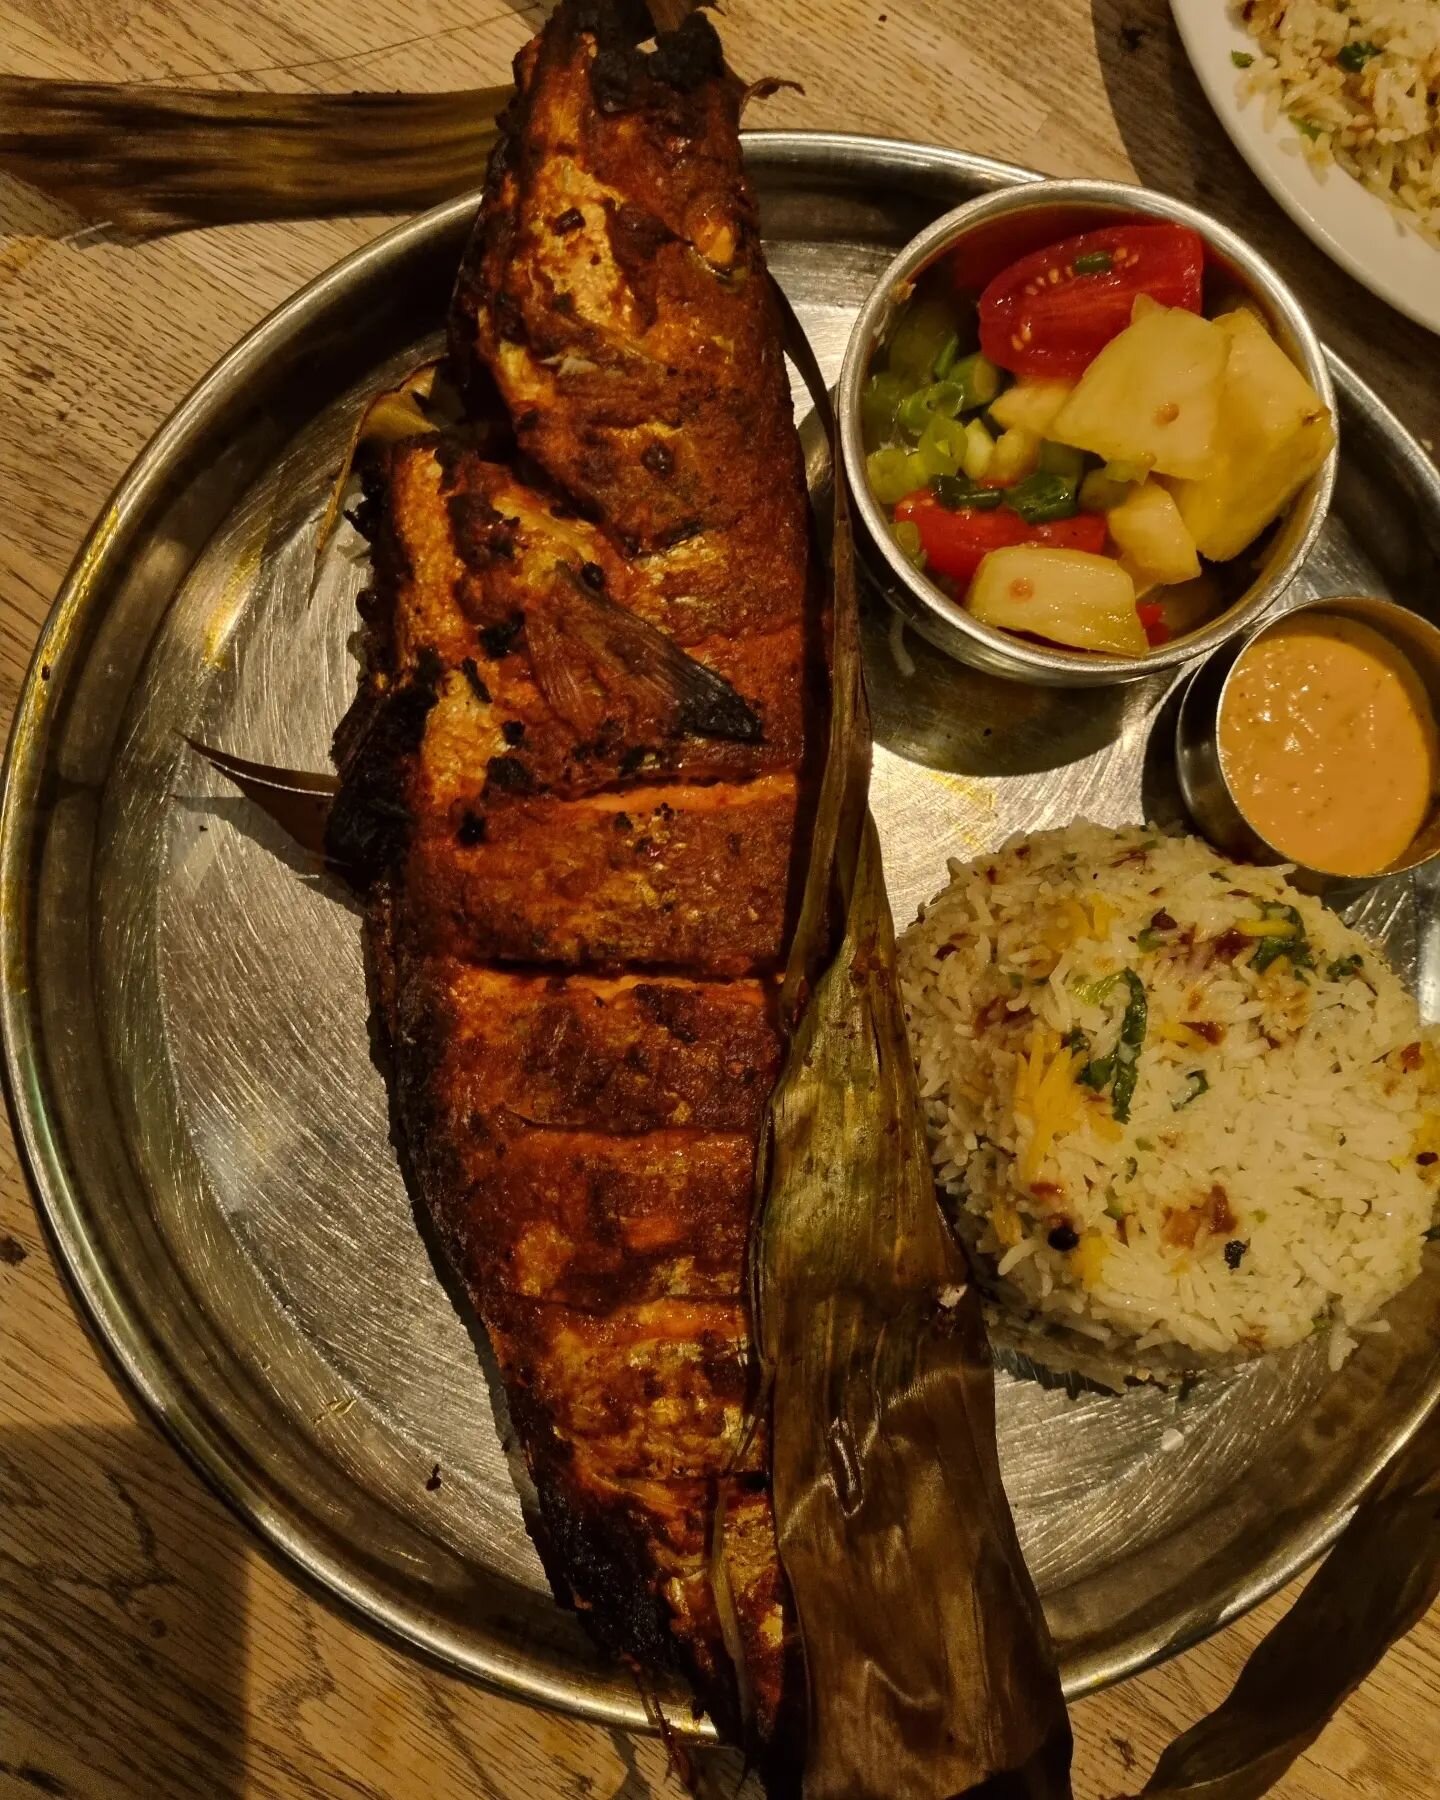 Amazing food at curry leaf last night. Everyone agreed that star of the show was whole seabass wrapped in banana leaves and cooked on the tandoor. Could eat it every night
#curryleaf #brighton #brightonfoodie